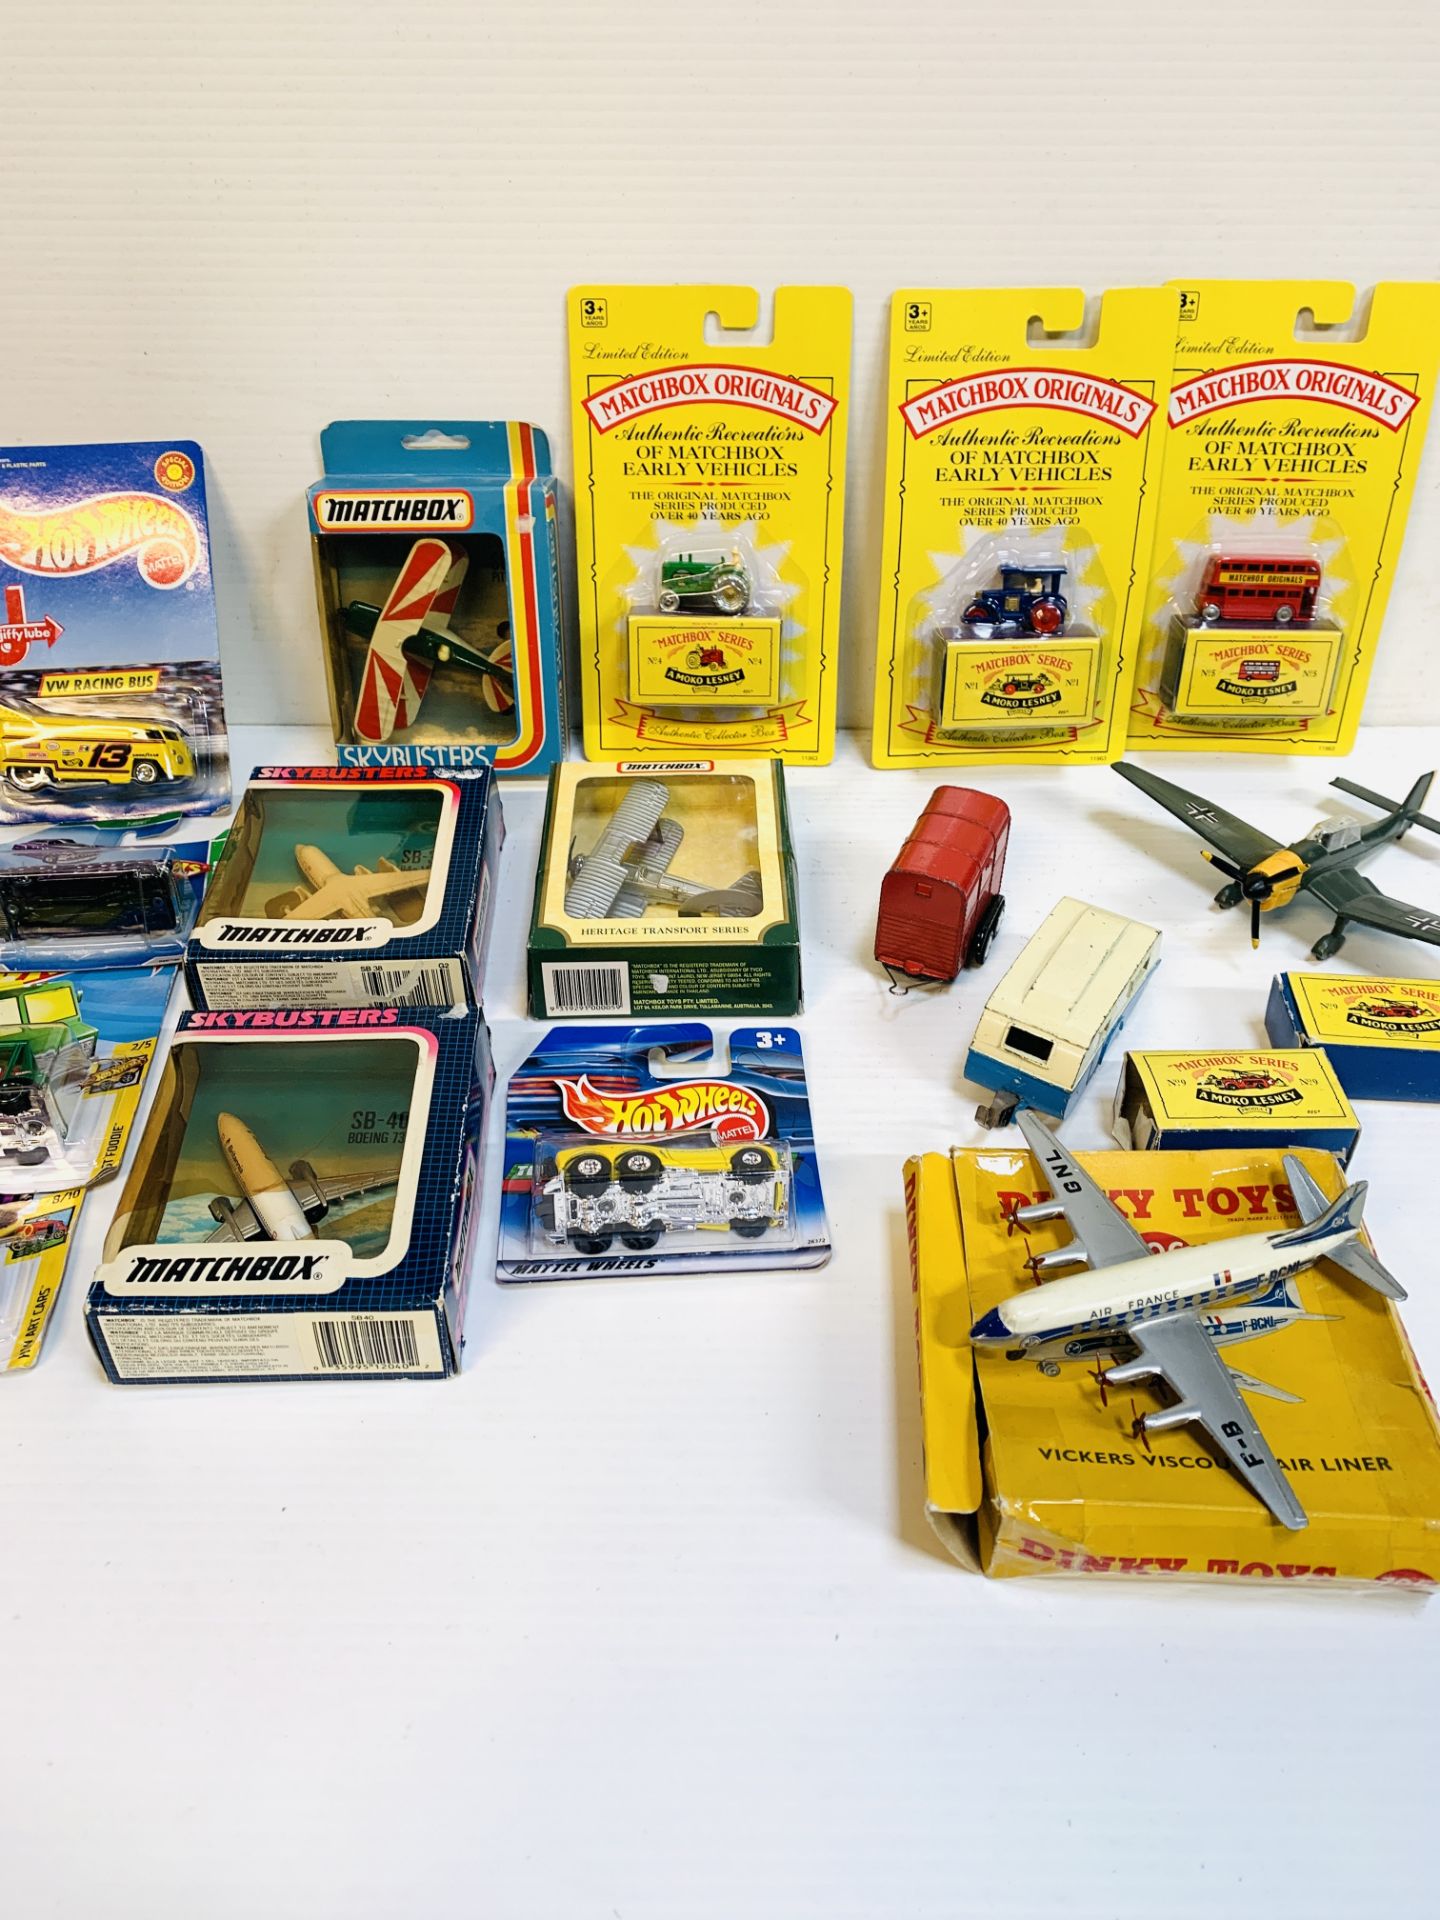 A collection of Matchbox, Hotwheels, Dinky and Corgi die cast model vehicles and aeroplanes.